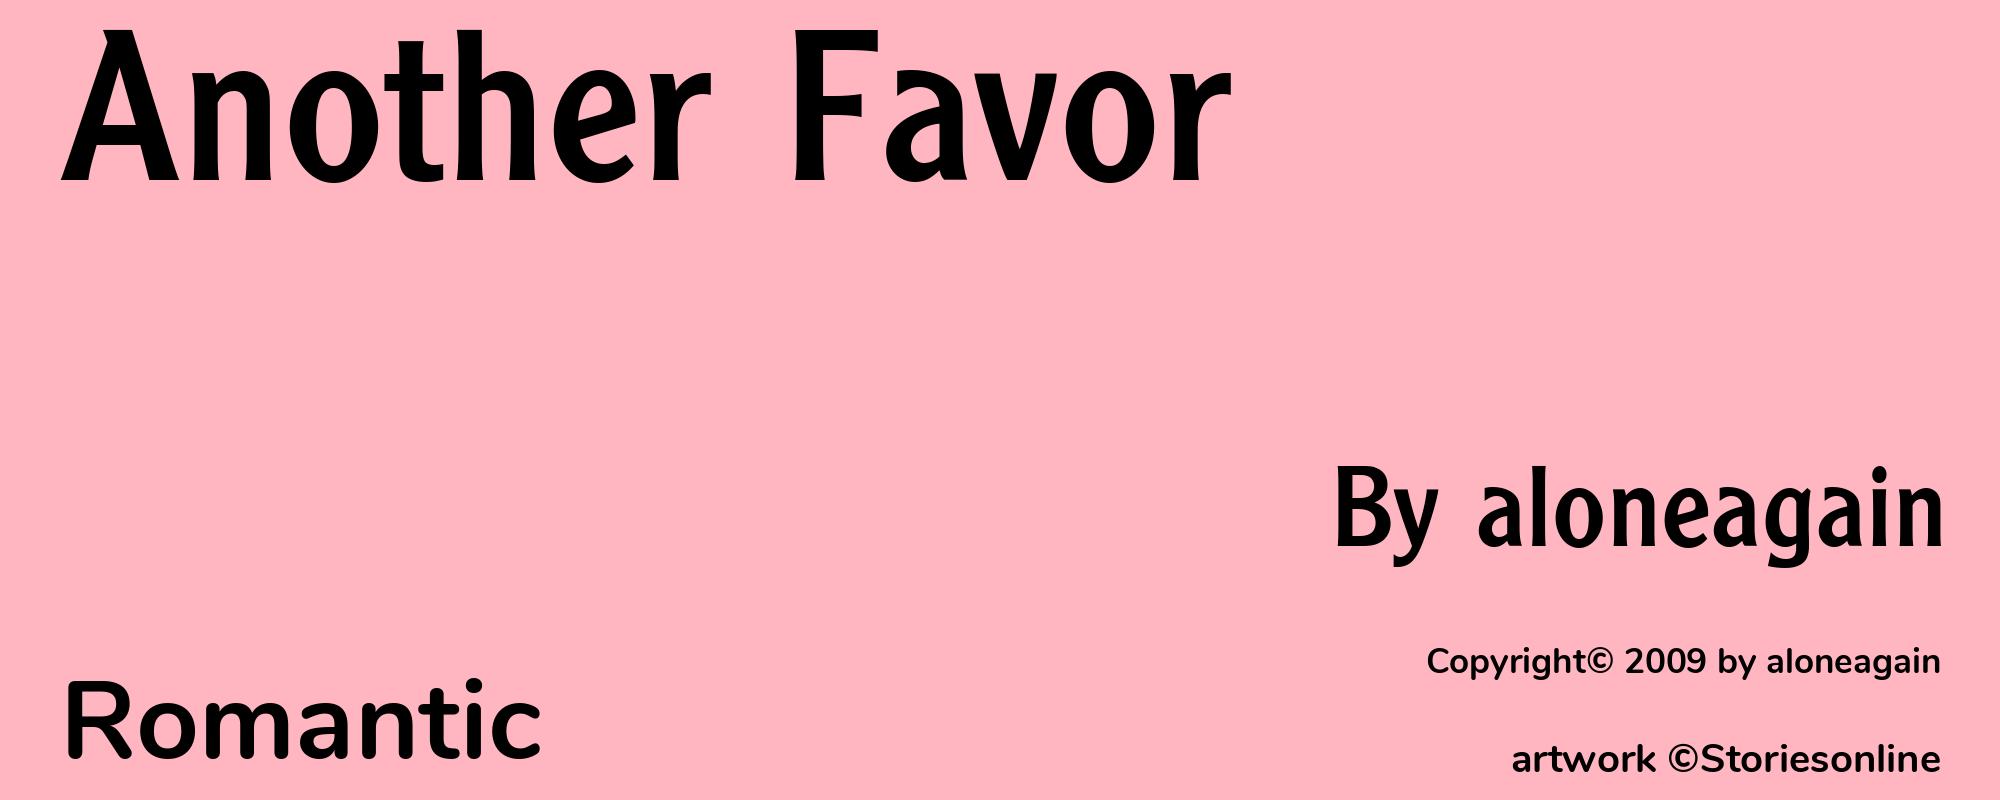 Another Favor - Cover